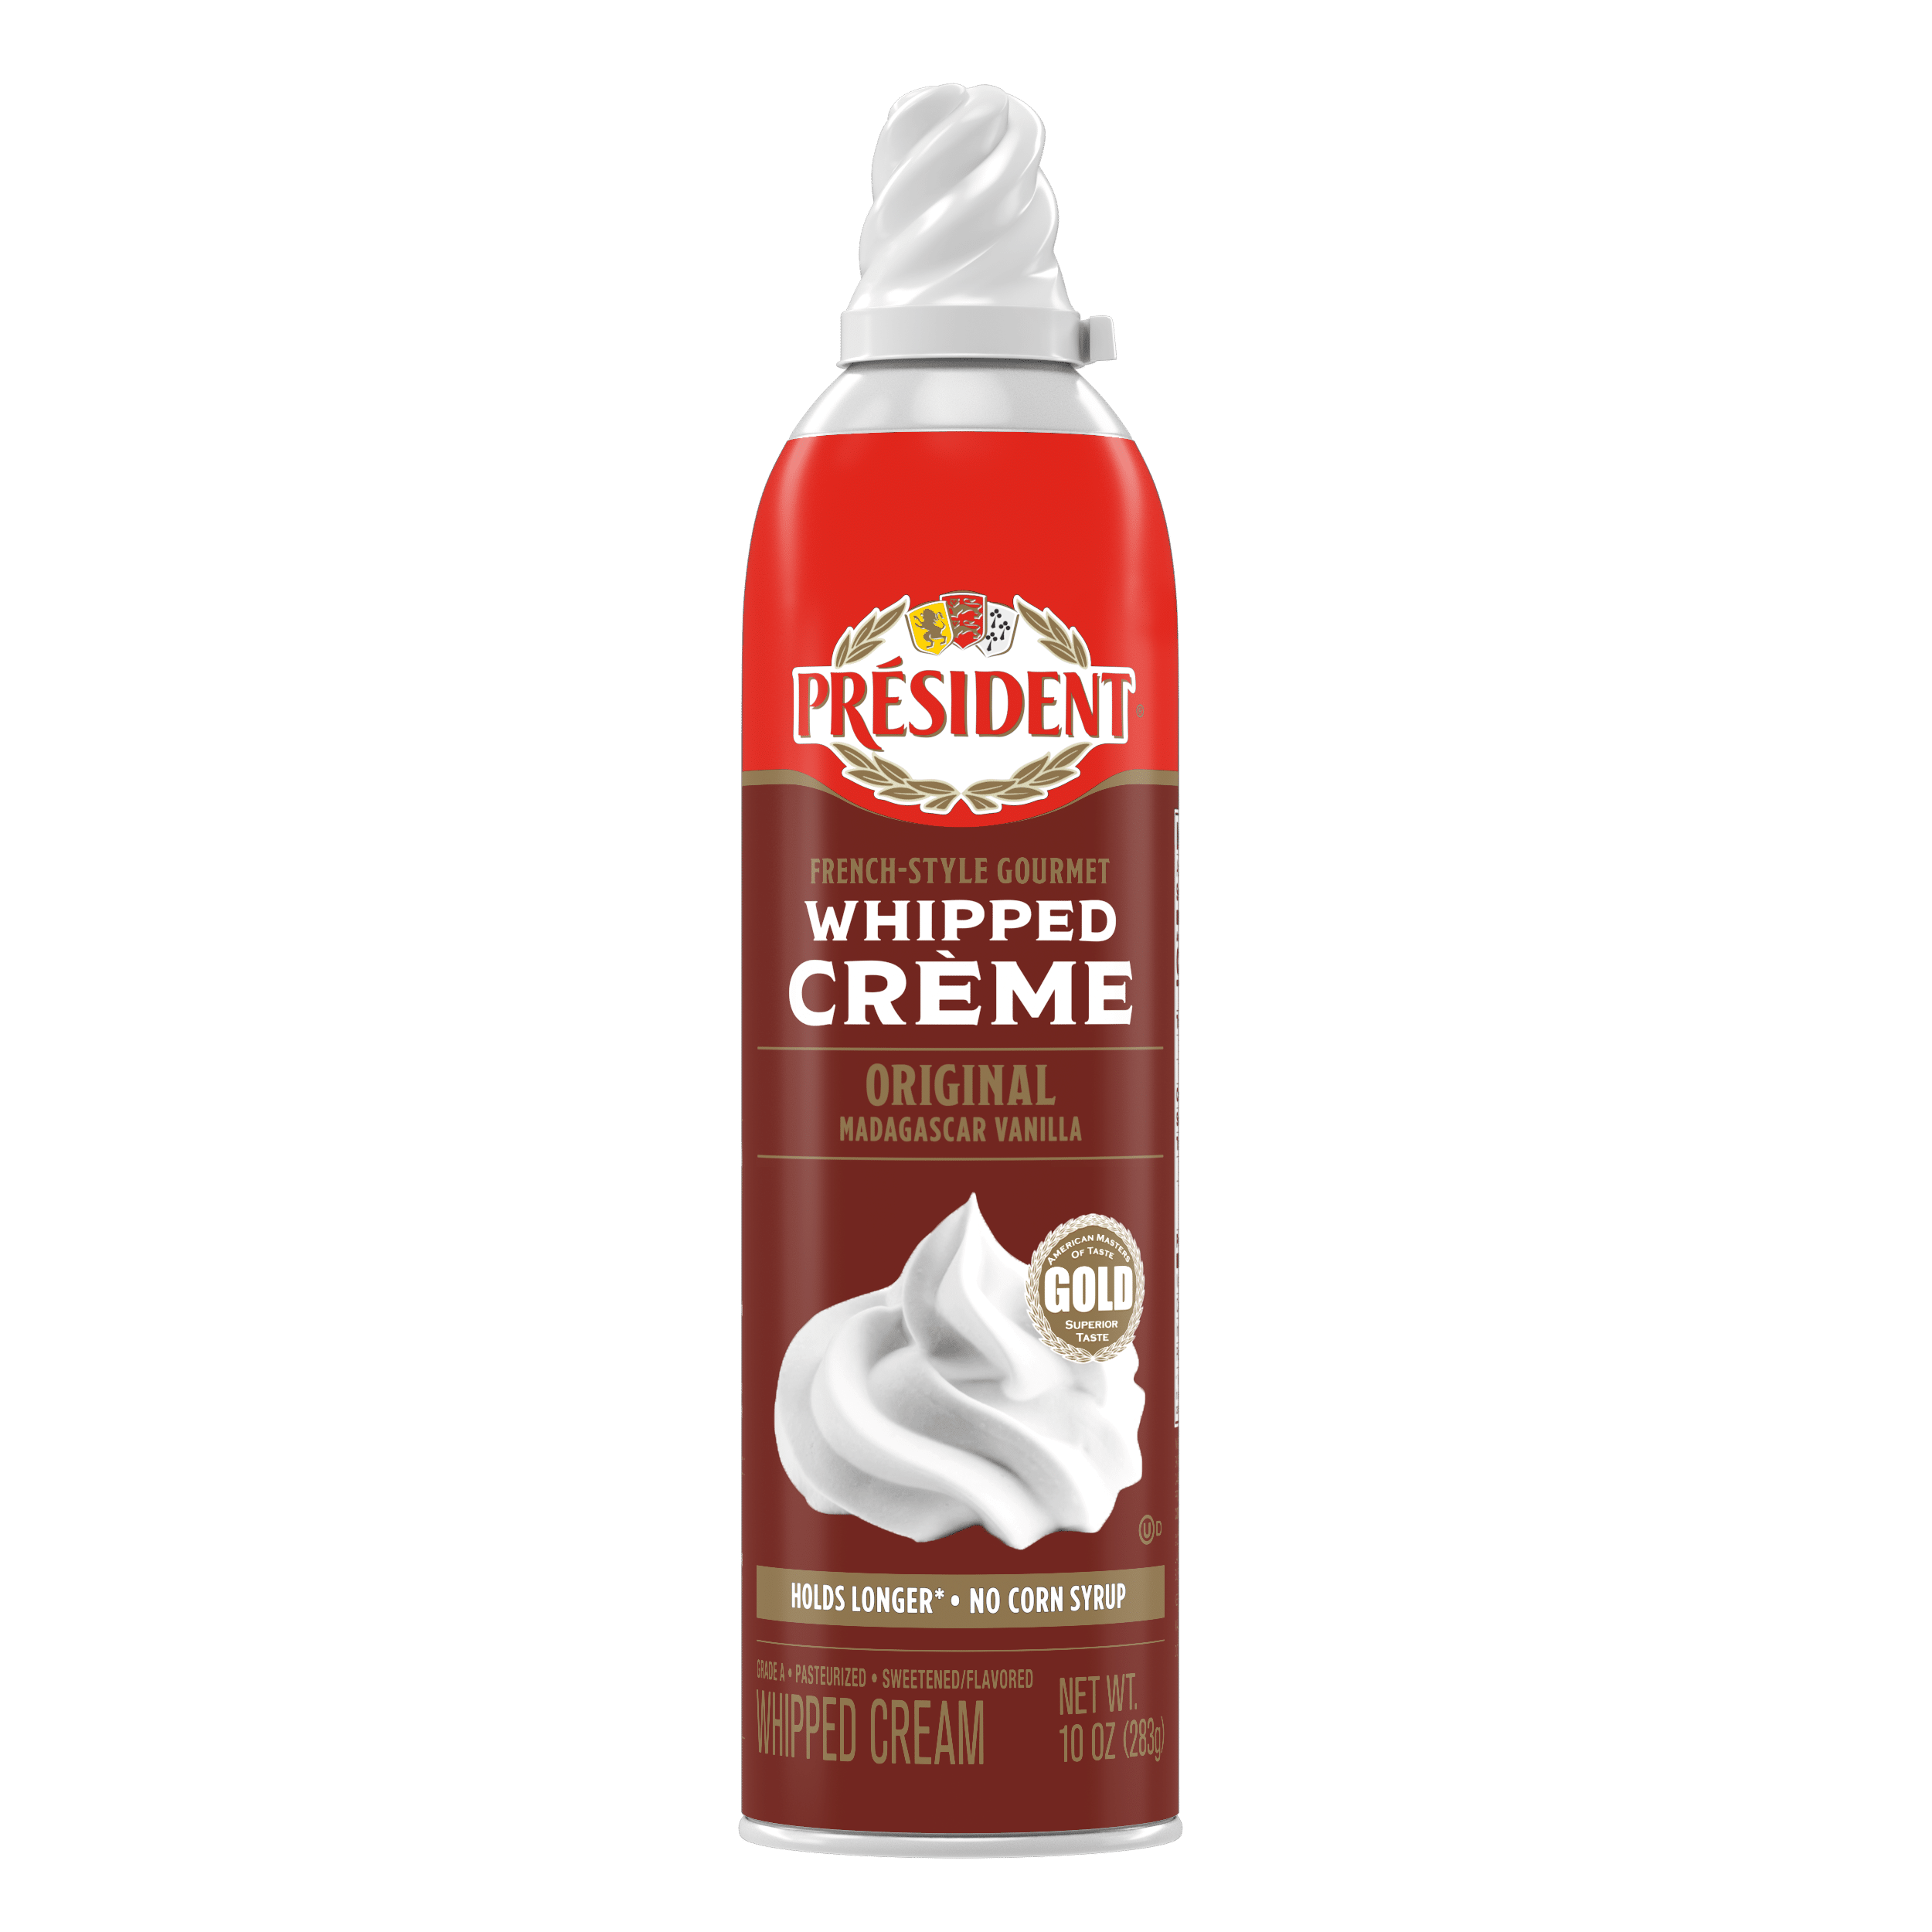 https://d1etyq5vfwwjqy.cloudfront.net/wp-content/uploads/2023/04/President-10oz-Original-Whipped-Cream-Front-72DPI.png